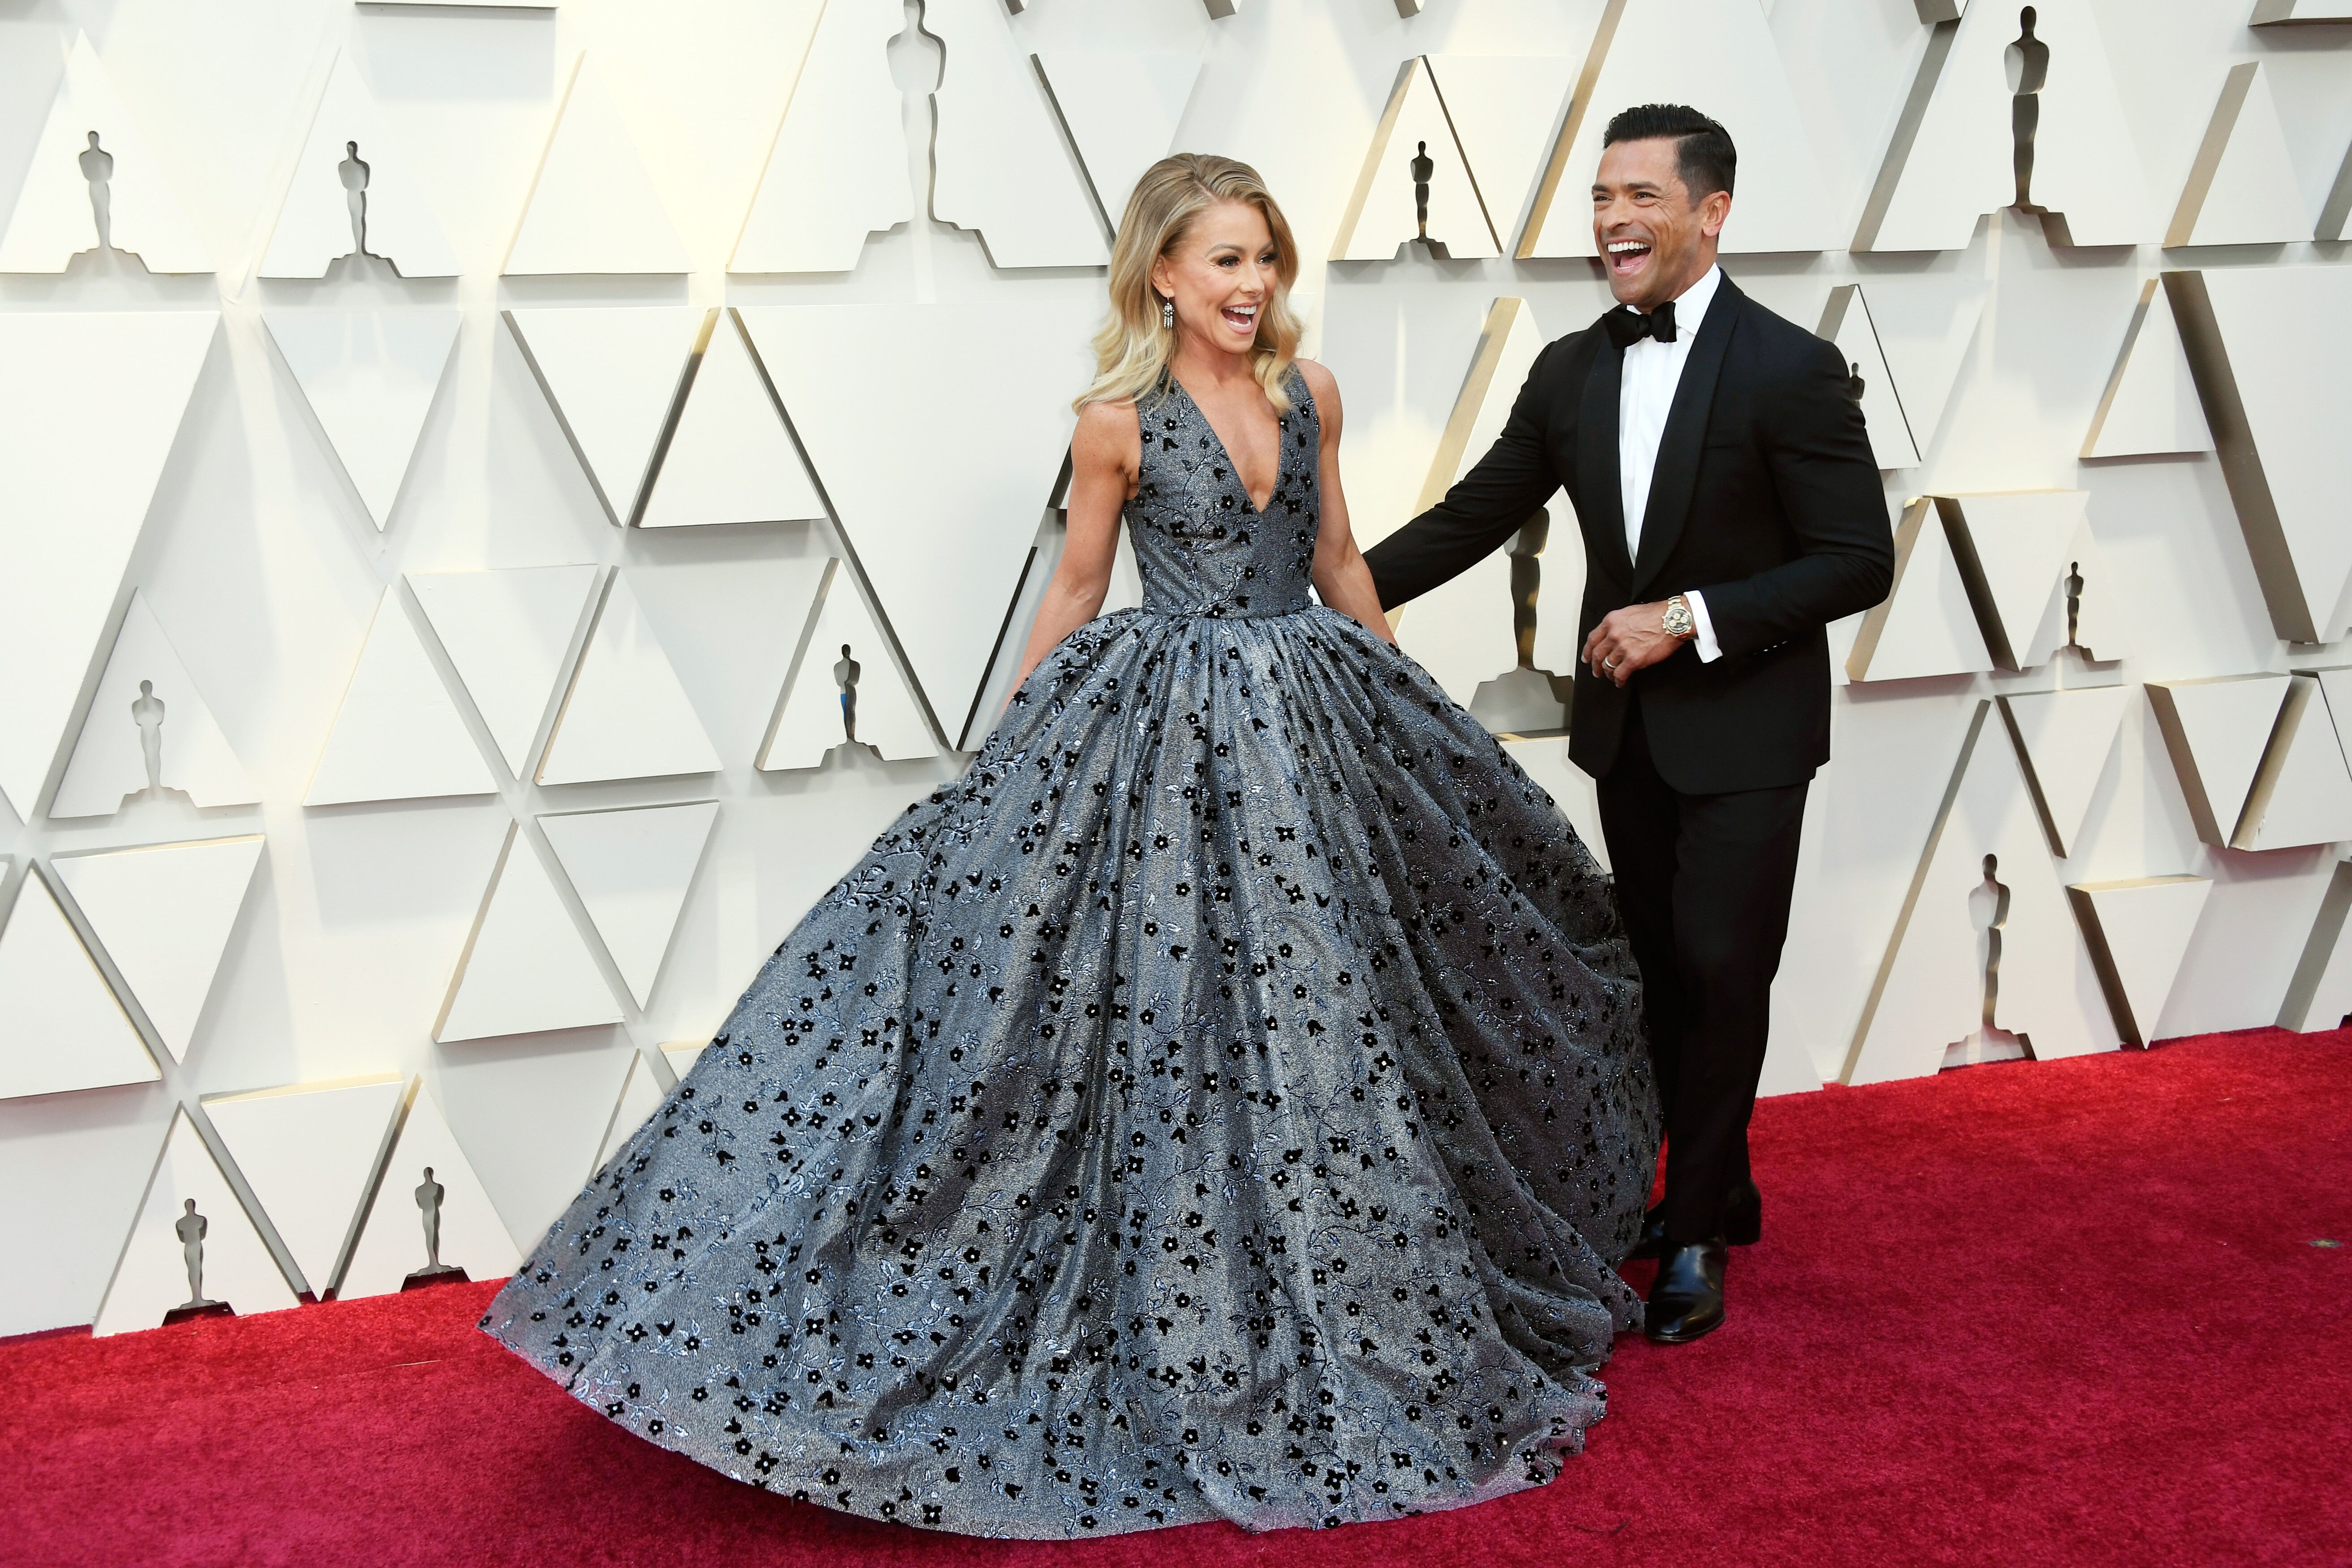  Kelly Ripa and Mark Consuelos at the 91st Annual Academy Awards on February 24, 2019 | Photo: Getty Images